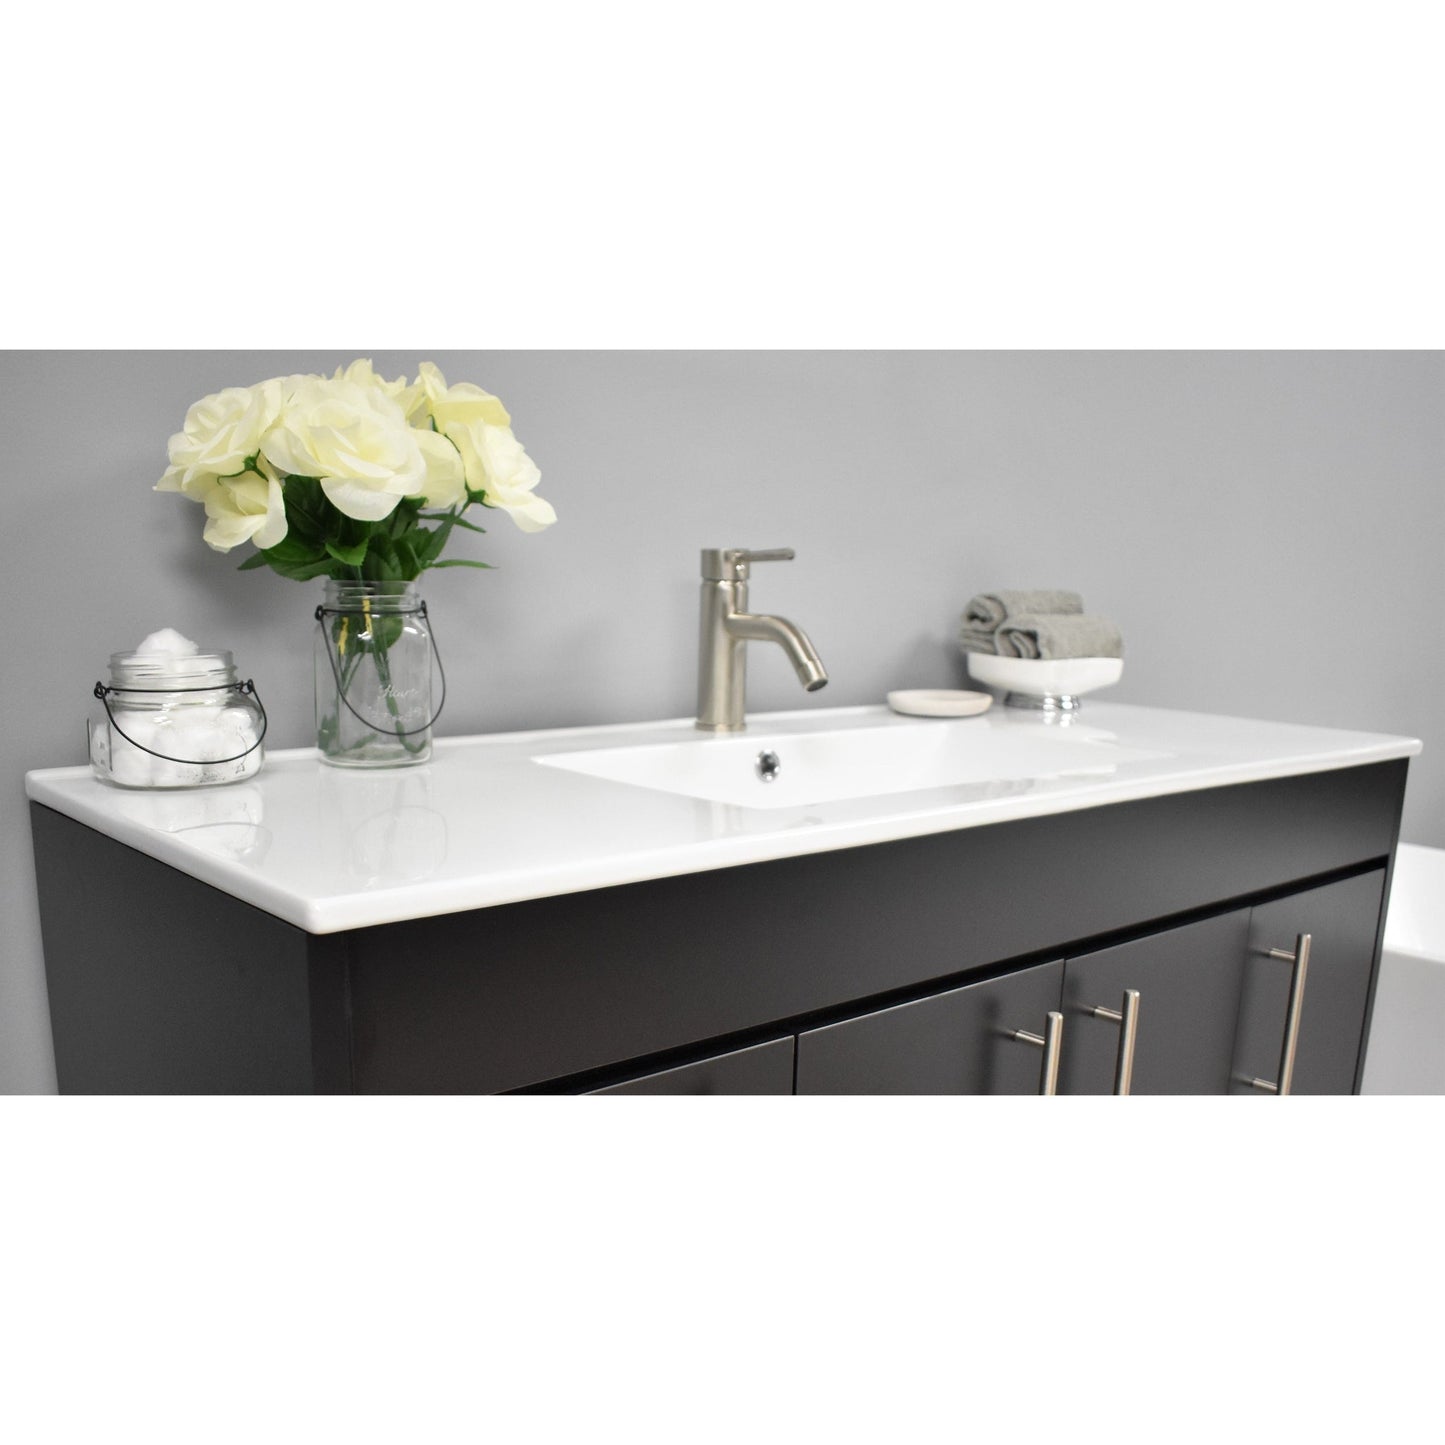 Volpa USA Villa 48" Black Freestanding Modern Bathroom Vanity With Integrated Ceramic Top and Brushed Nickel Round Handles